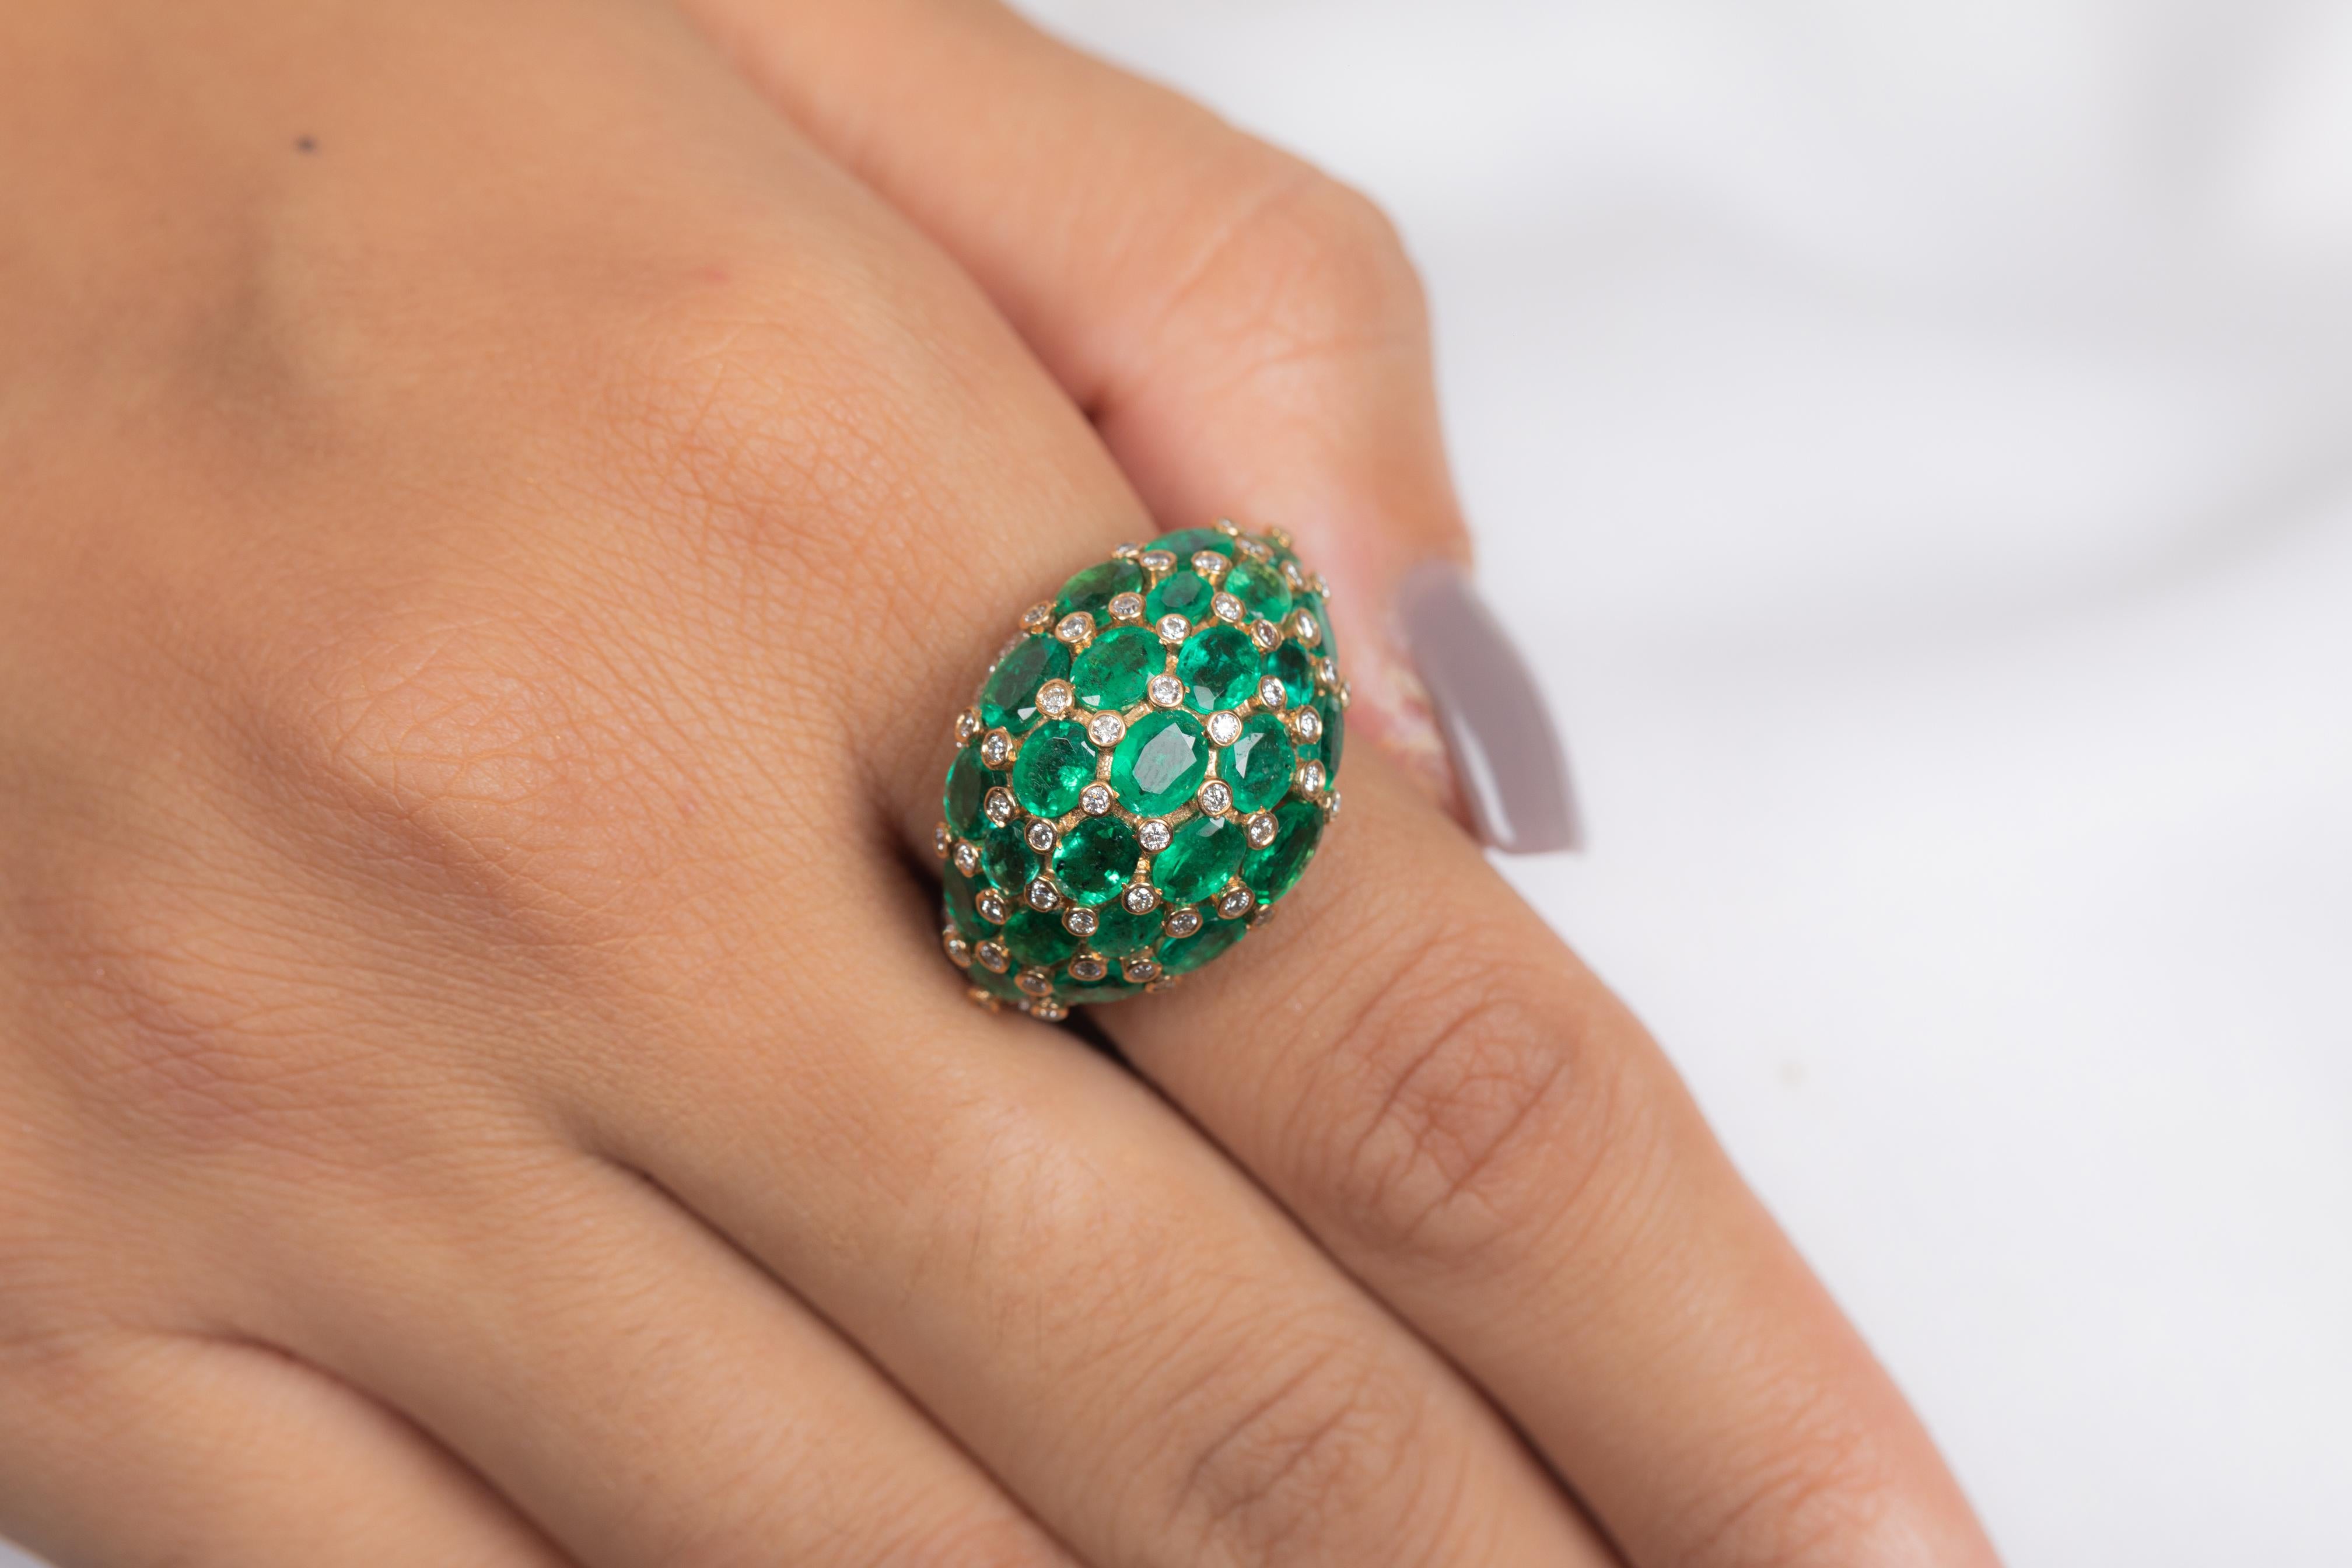 Emerald Diamond Cocktail Dome Ring in 18K Gold featuring natural emerald of 5.32 carats and diamonds of 1.51 carats. The gorgeous handcrafted ring goes with every style.
Emerald gemstone enhances the intellectual capacity of the person.
Designed